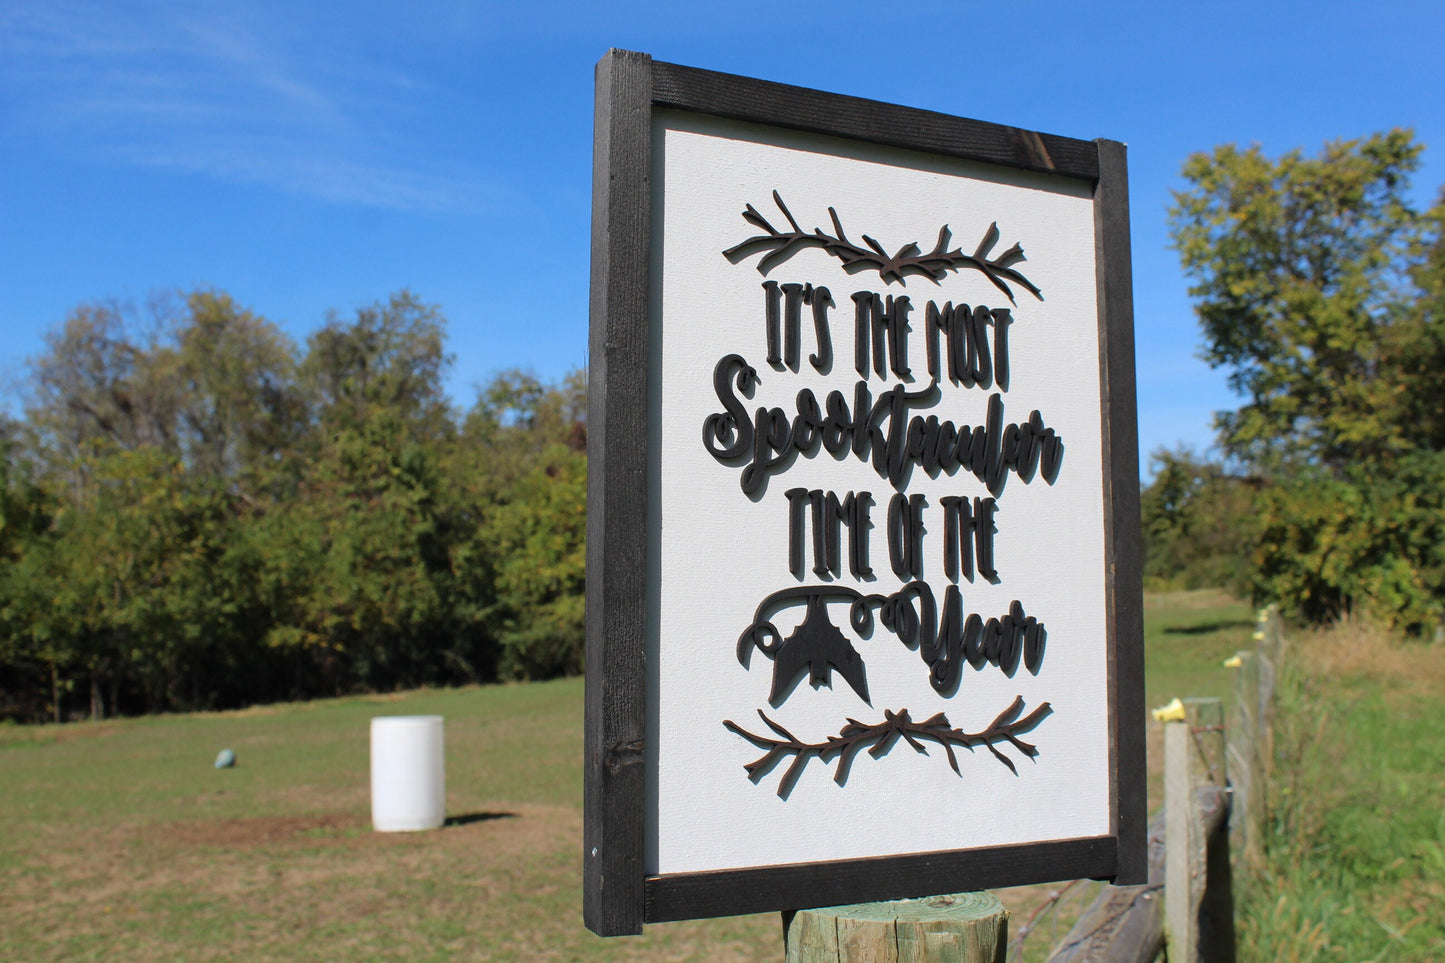 Halloween Spooky Season Spooktacular Sign Time Year Black and White Sticks Bats Chic Cursive Words Sayings Framed 3D Lettering Sticks Wood